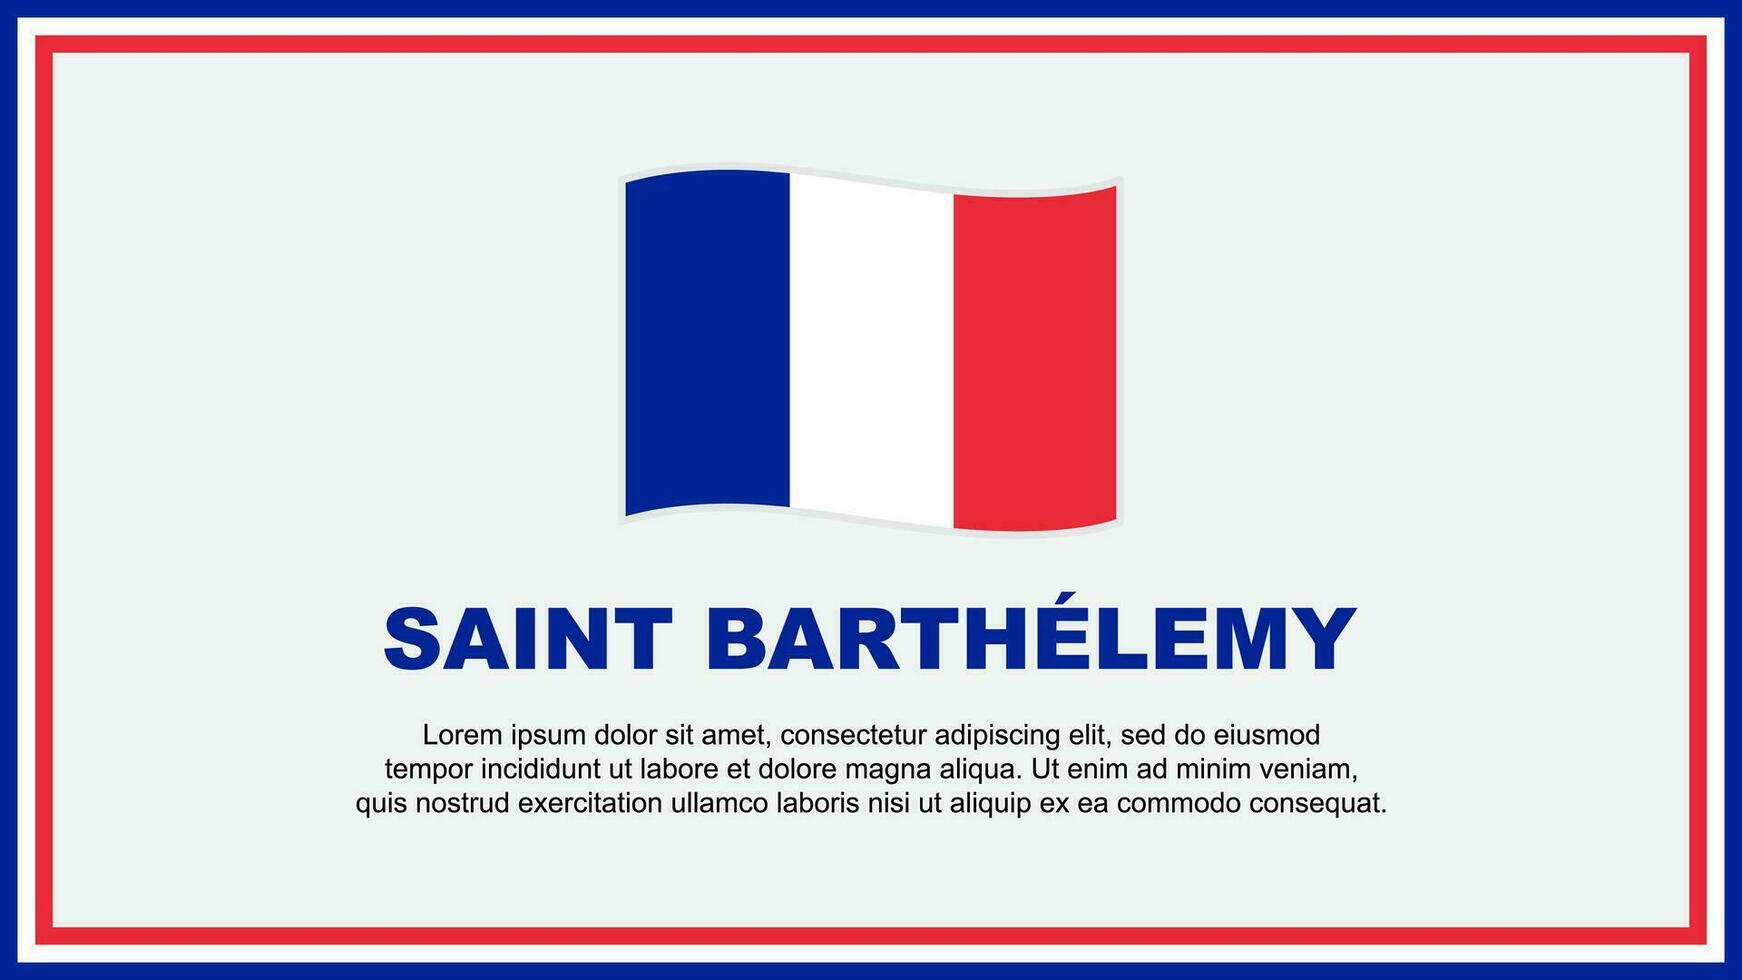 Saint Barthelemy Flag Abstract Background Design Template. Saint Barthelemy Independence Day Banner Social Media Vector Illustration. Banner